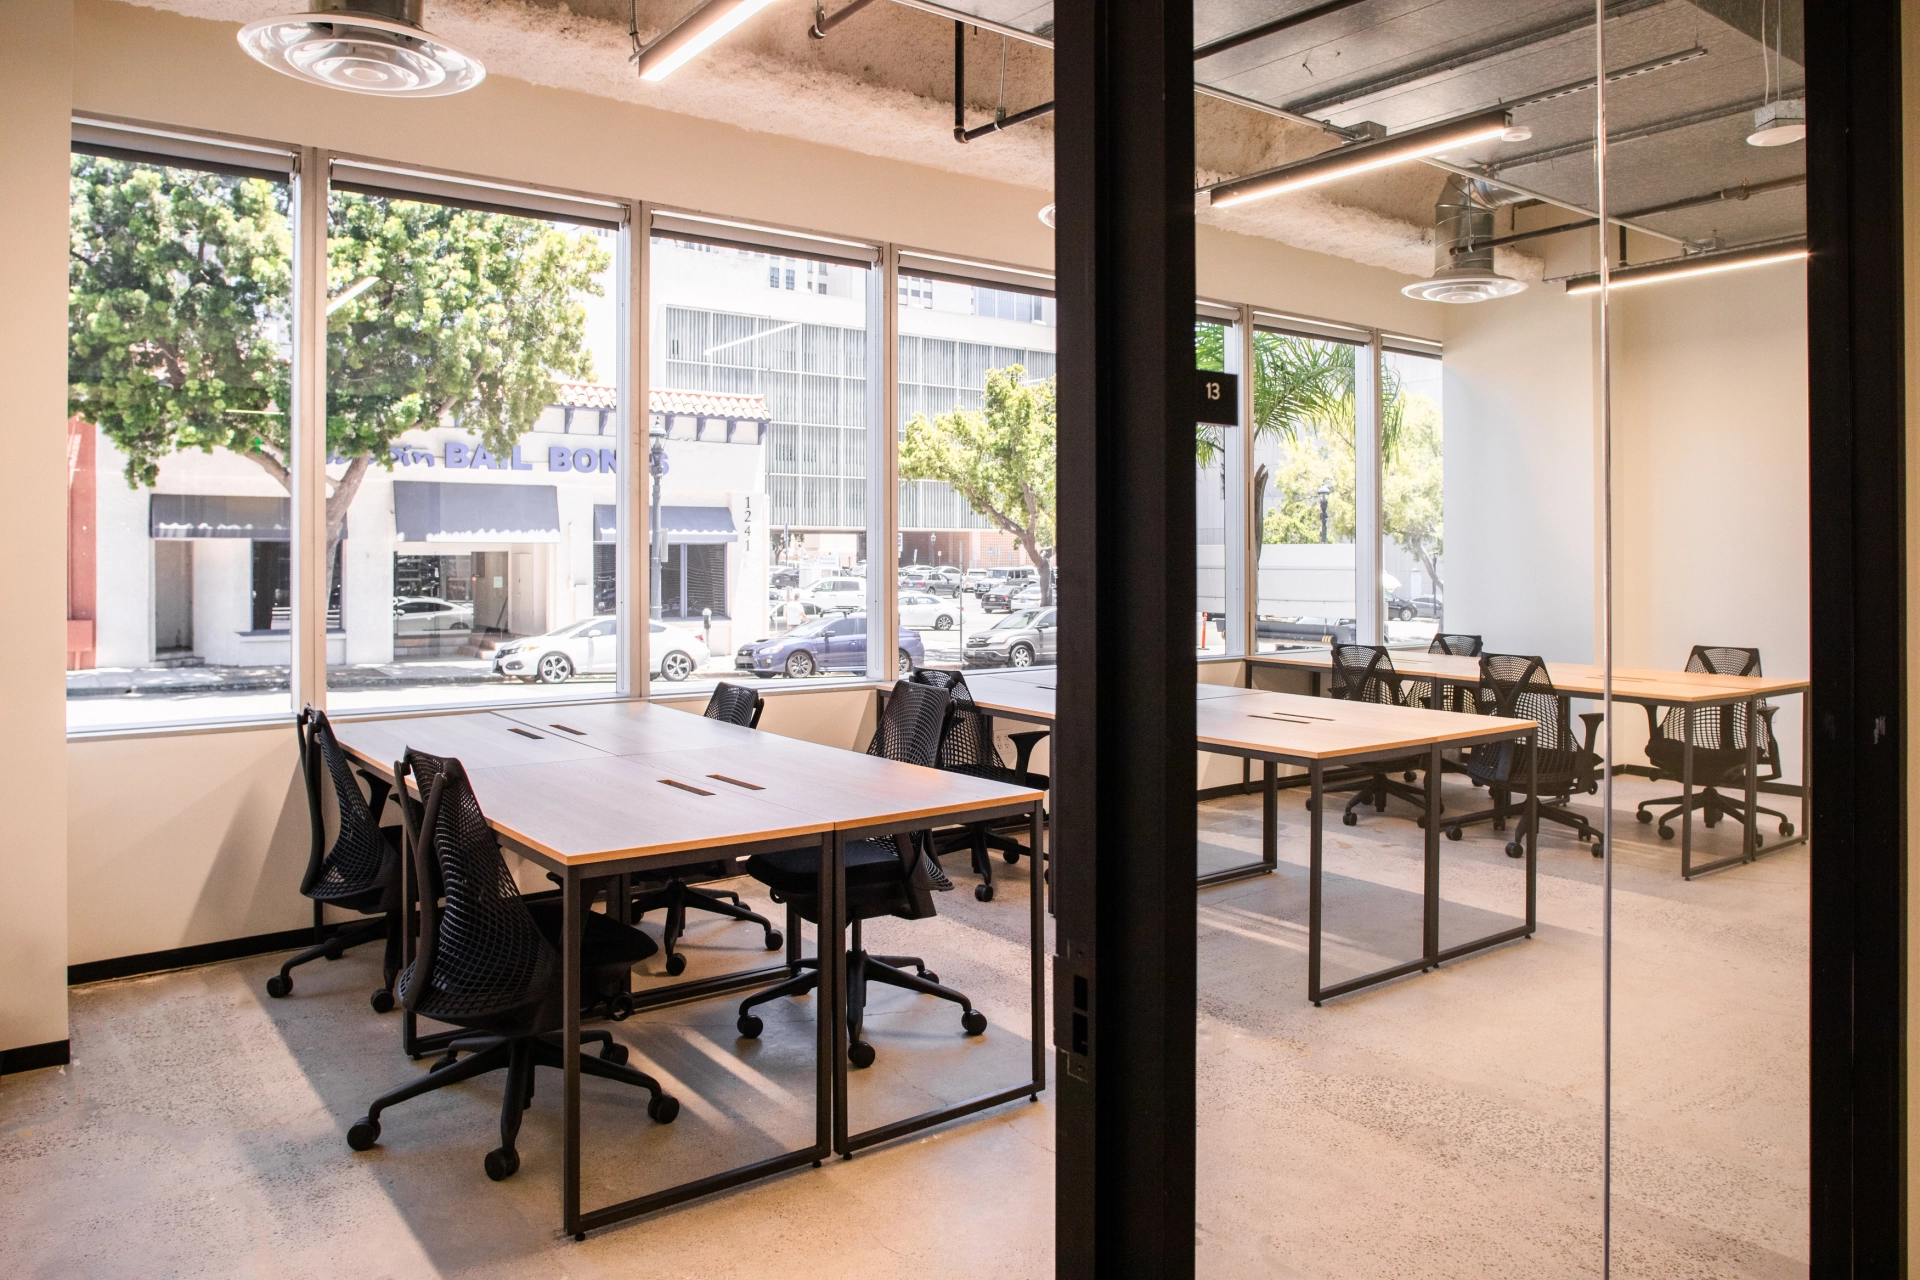 A coworking space or office with a desk, chairs, and a glass door.